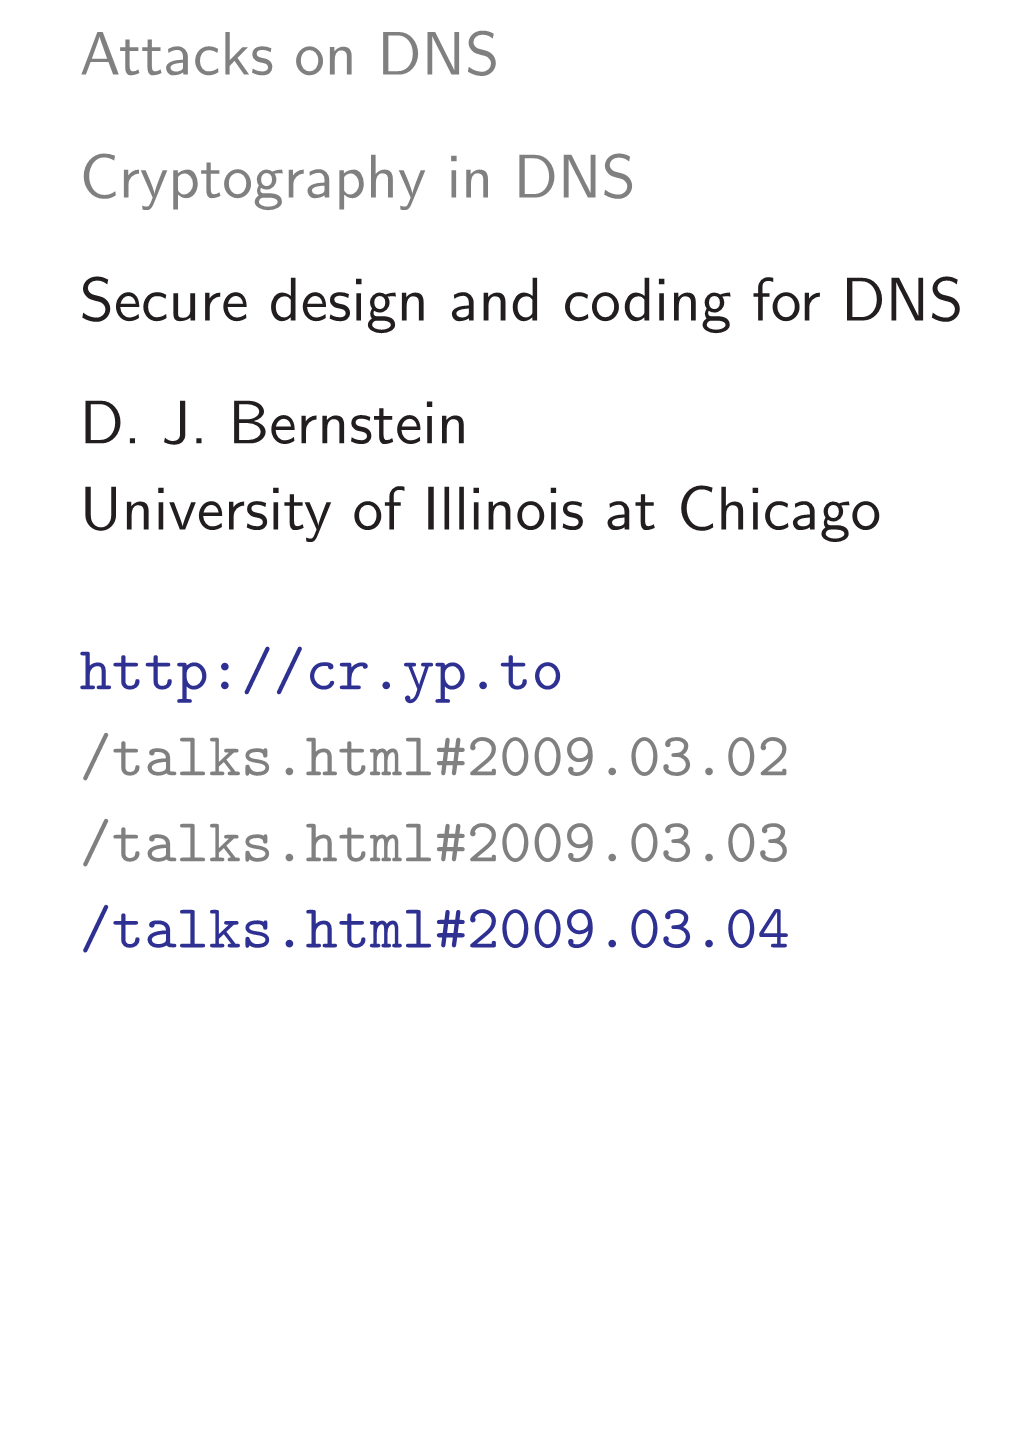 Attacks on DNS Cryptography in DNS Secure Design and Coding for DNS